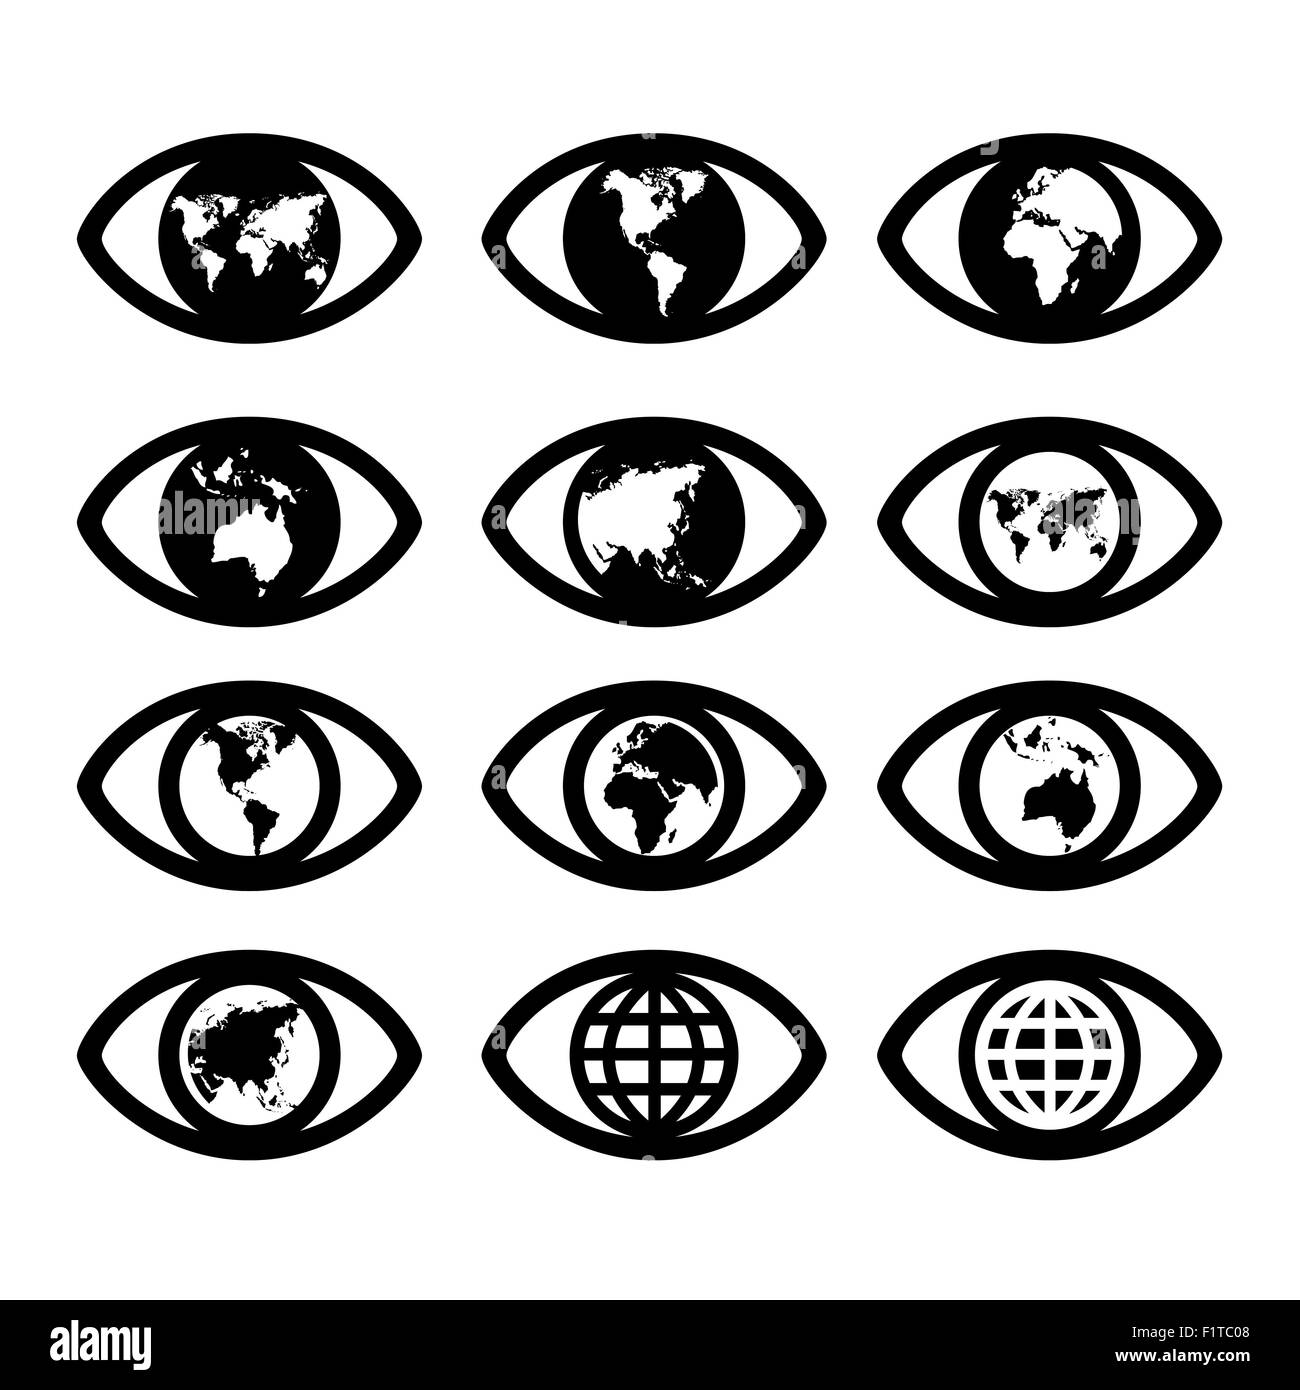 world map sign in the eye,eye sign,vision concept ,world symbol ,business concept. Stock Photo